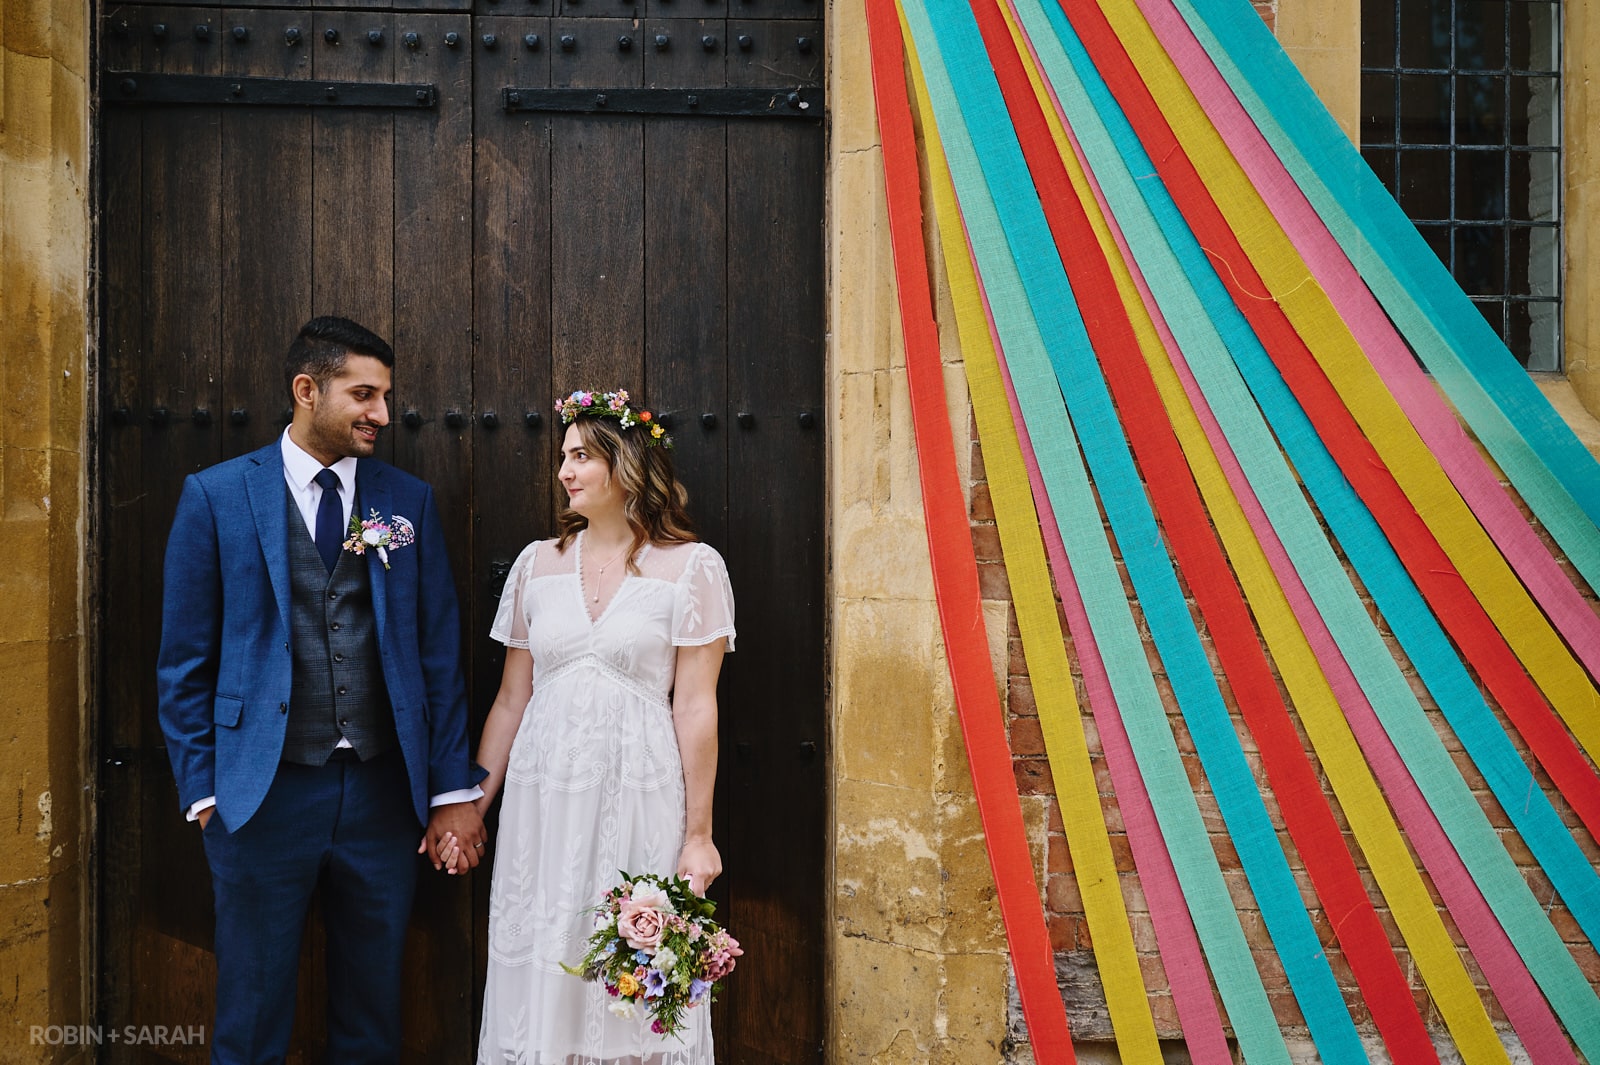 Bride and groom hold hands in doorway of old building with coloured ribbons